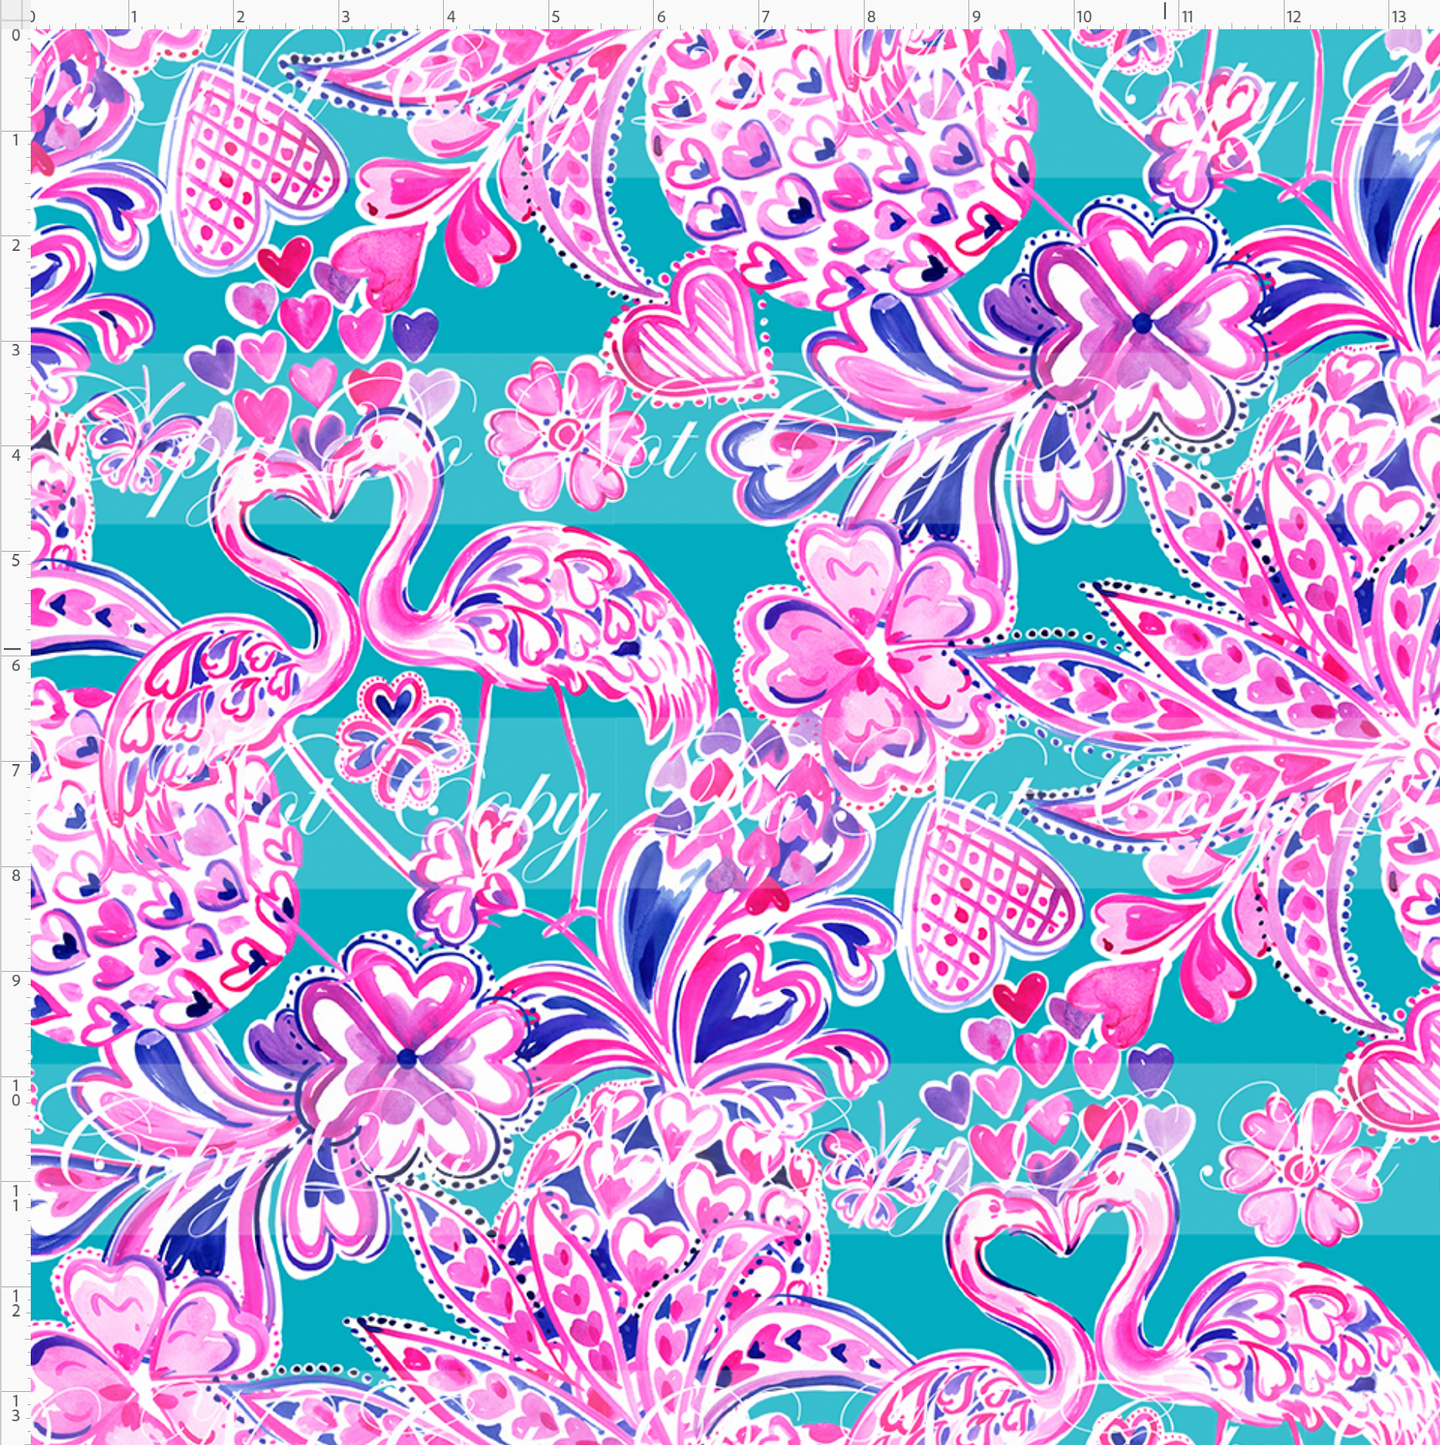 PREORDER - LP Inspired - Flamingo Hearts - Teal - LARGE SCALE